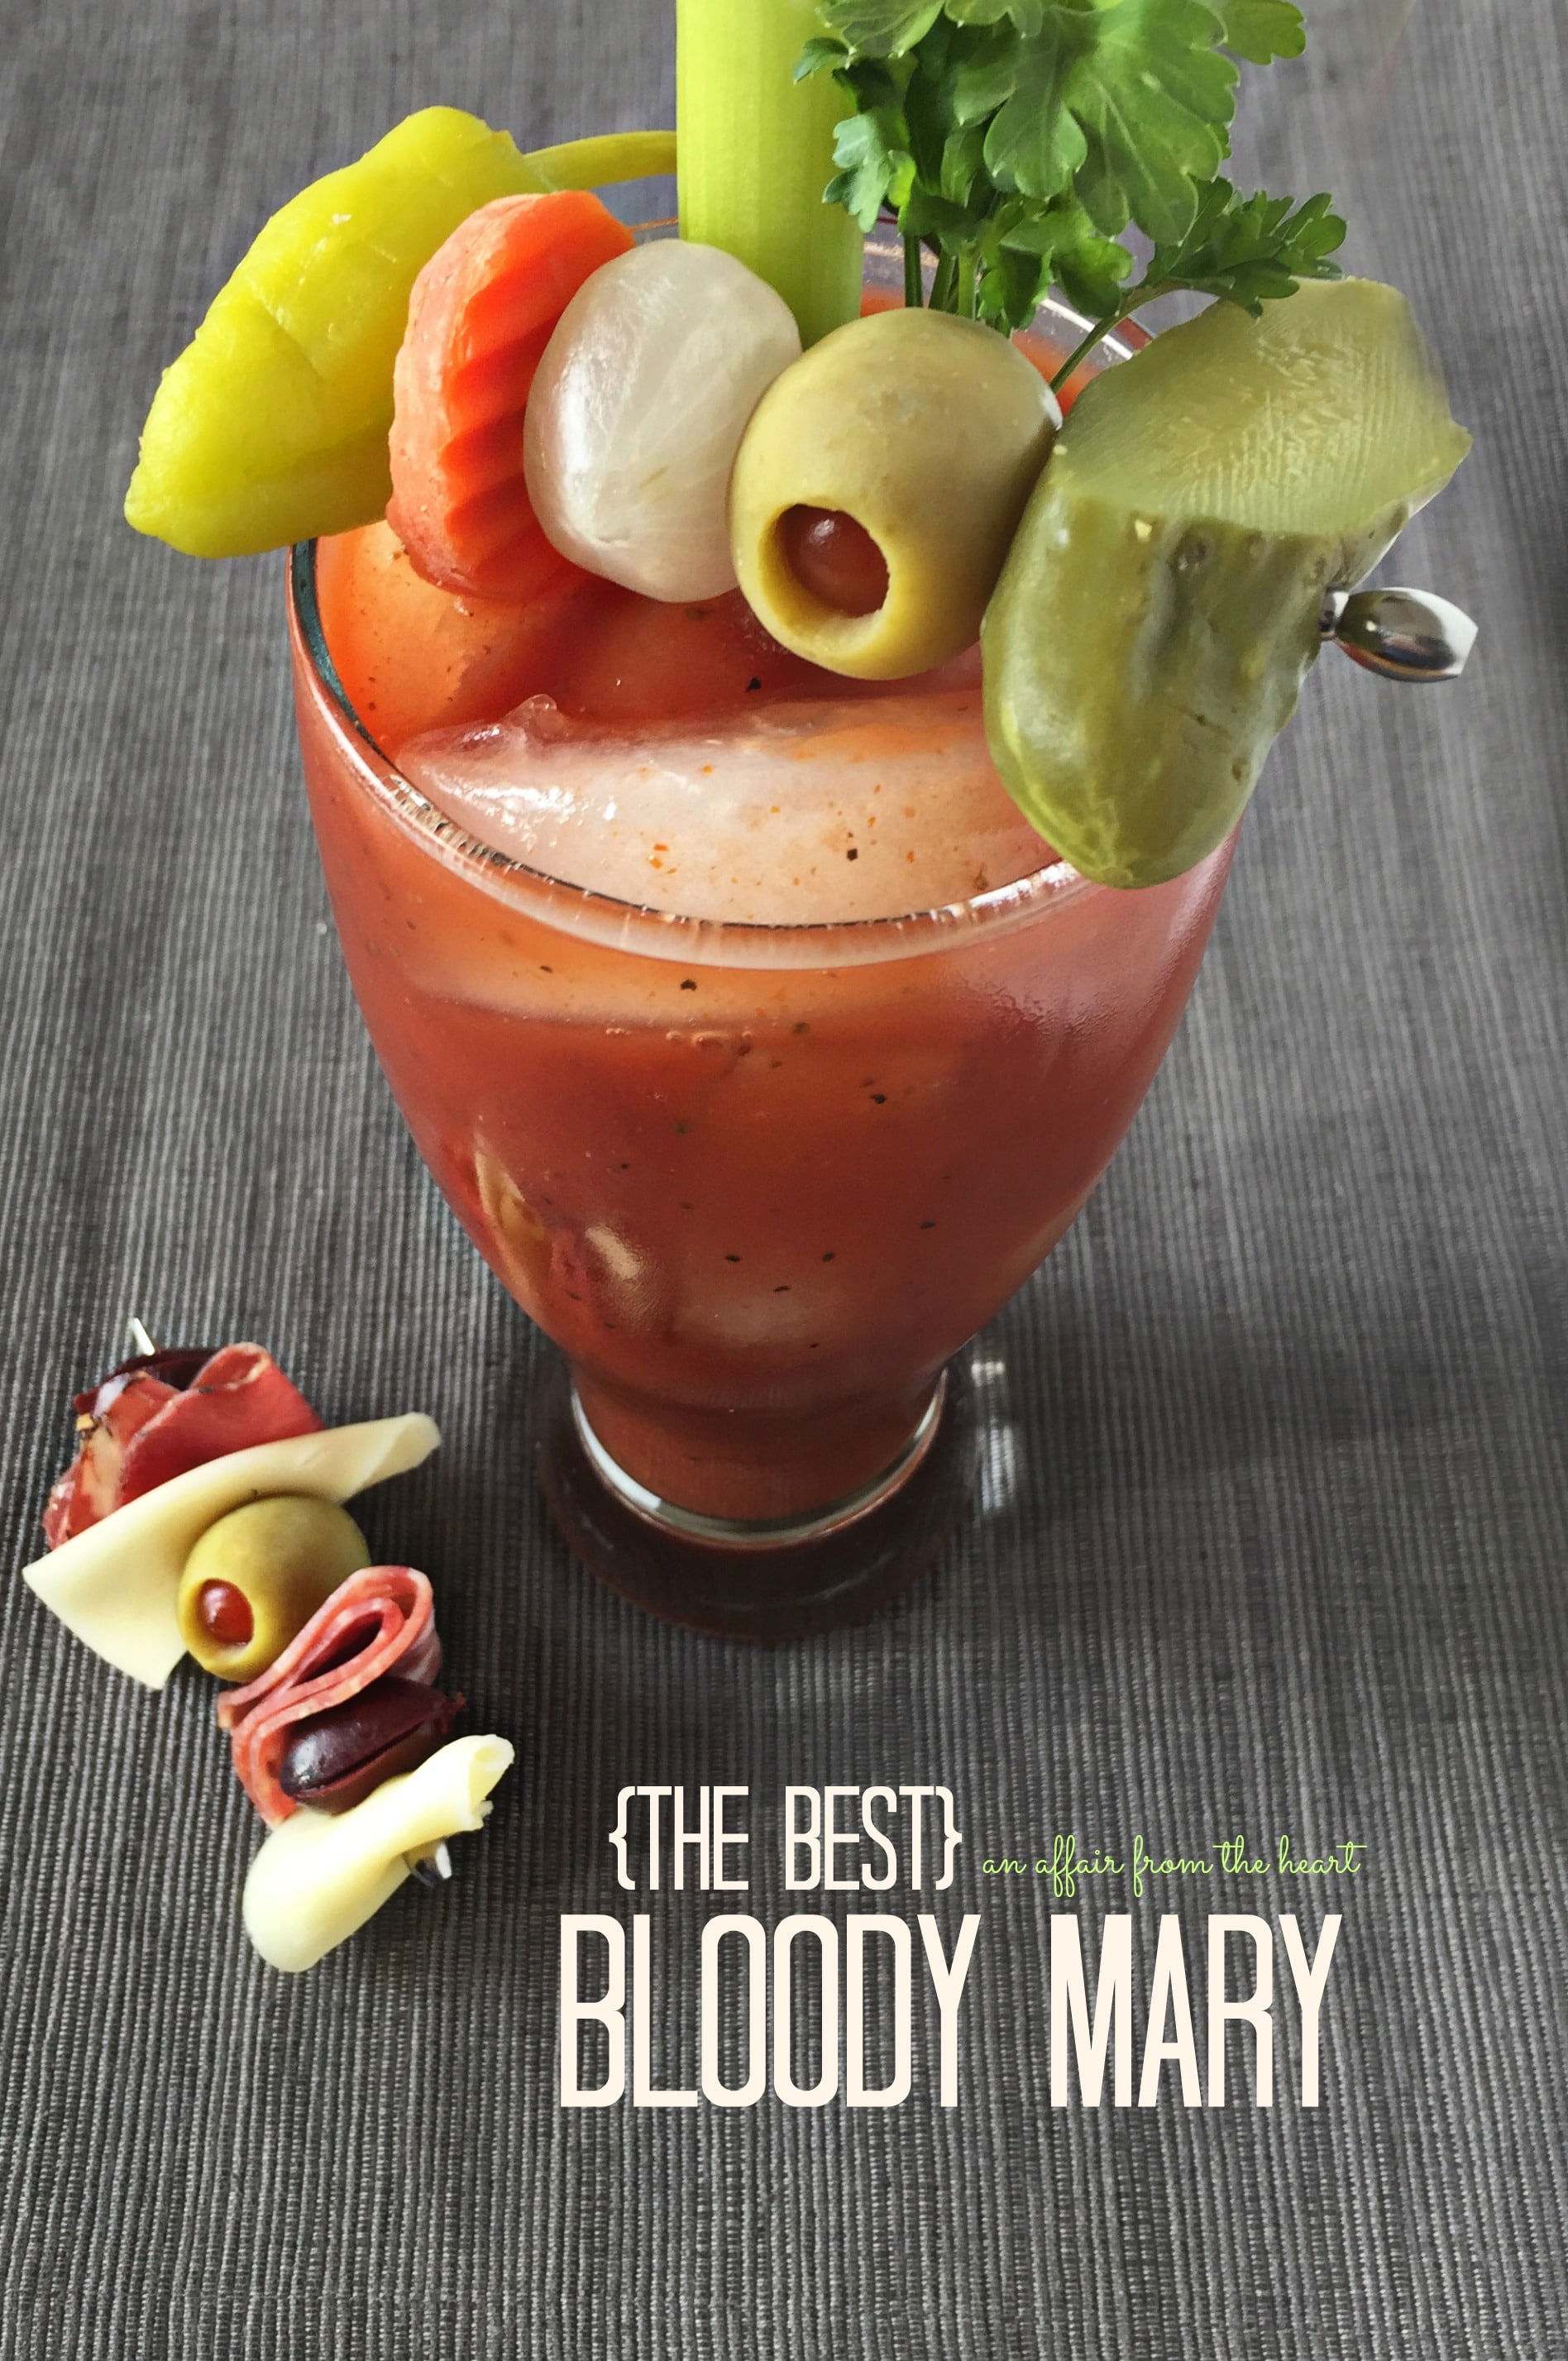 The Best Bloody Mary,Work From Home Jobs Hiring